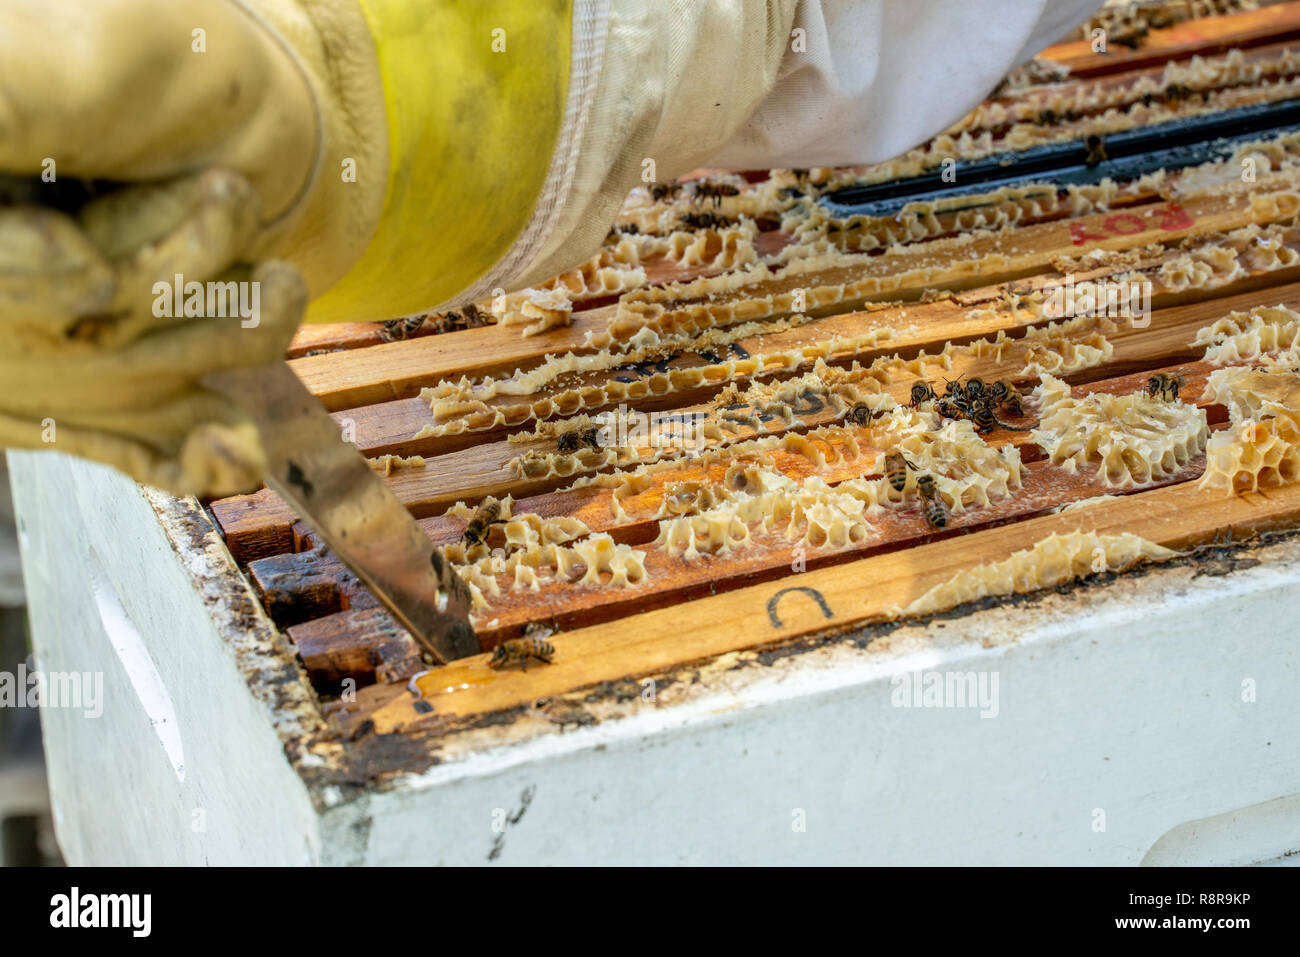 Using a hive tool to lift a frame in a bee hive, for harvesting honey Stock Photo